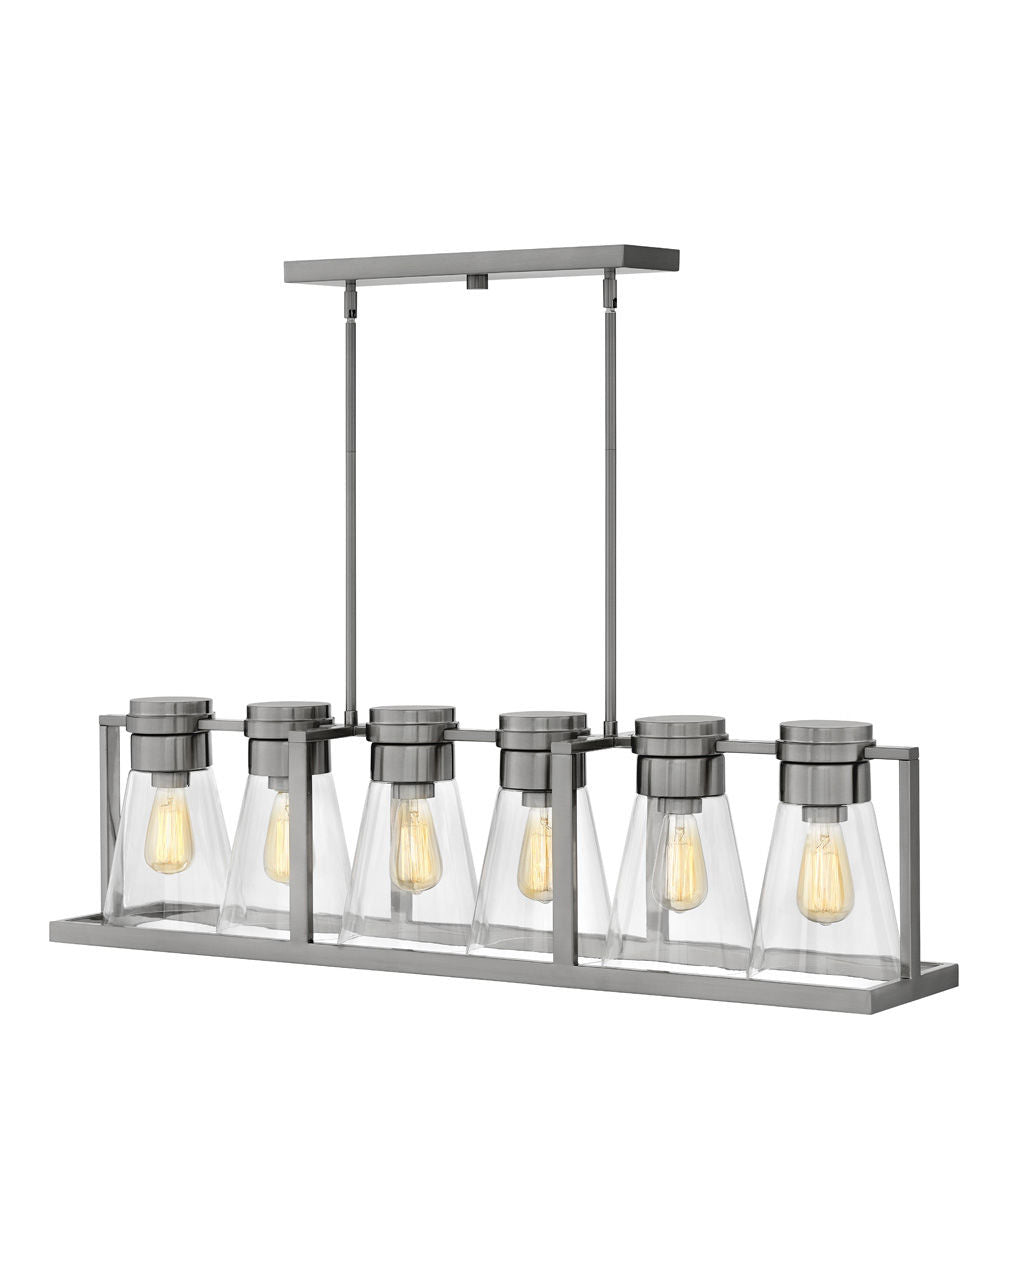 Hinkley Refinery Chandelier Chandeliers Hinkley Brushed Nickel with Clear glass 8.25x43.75x11.25 